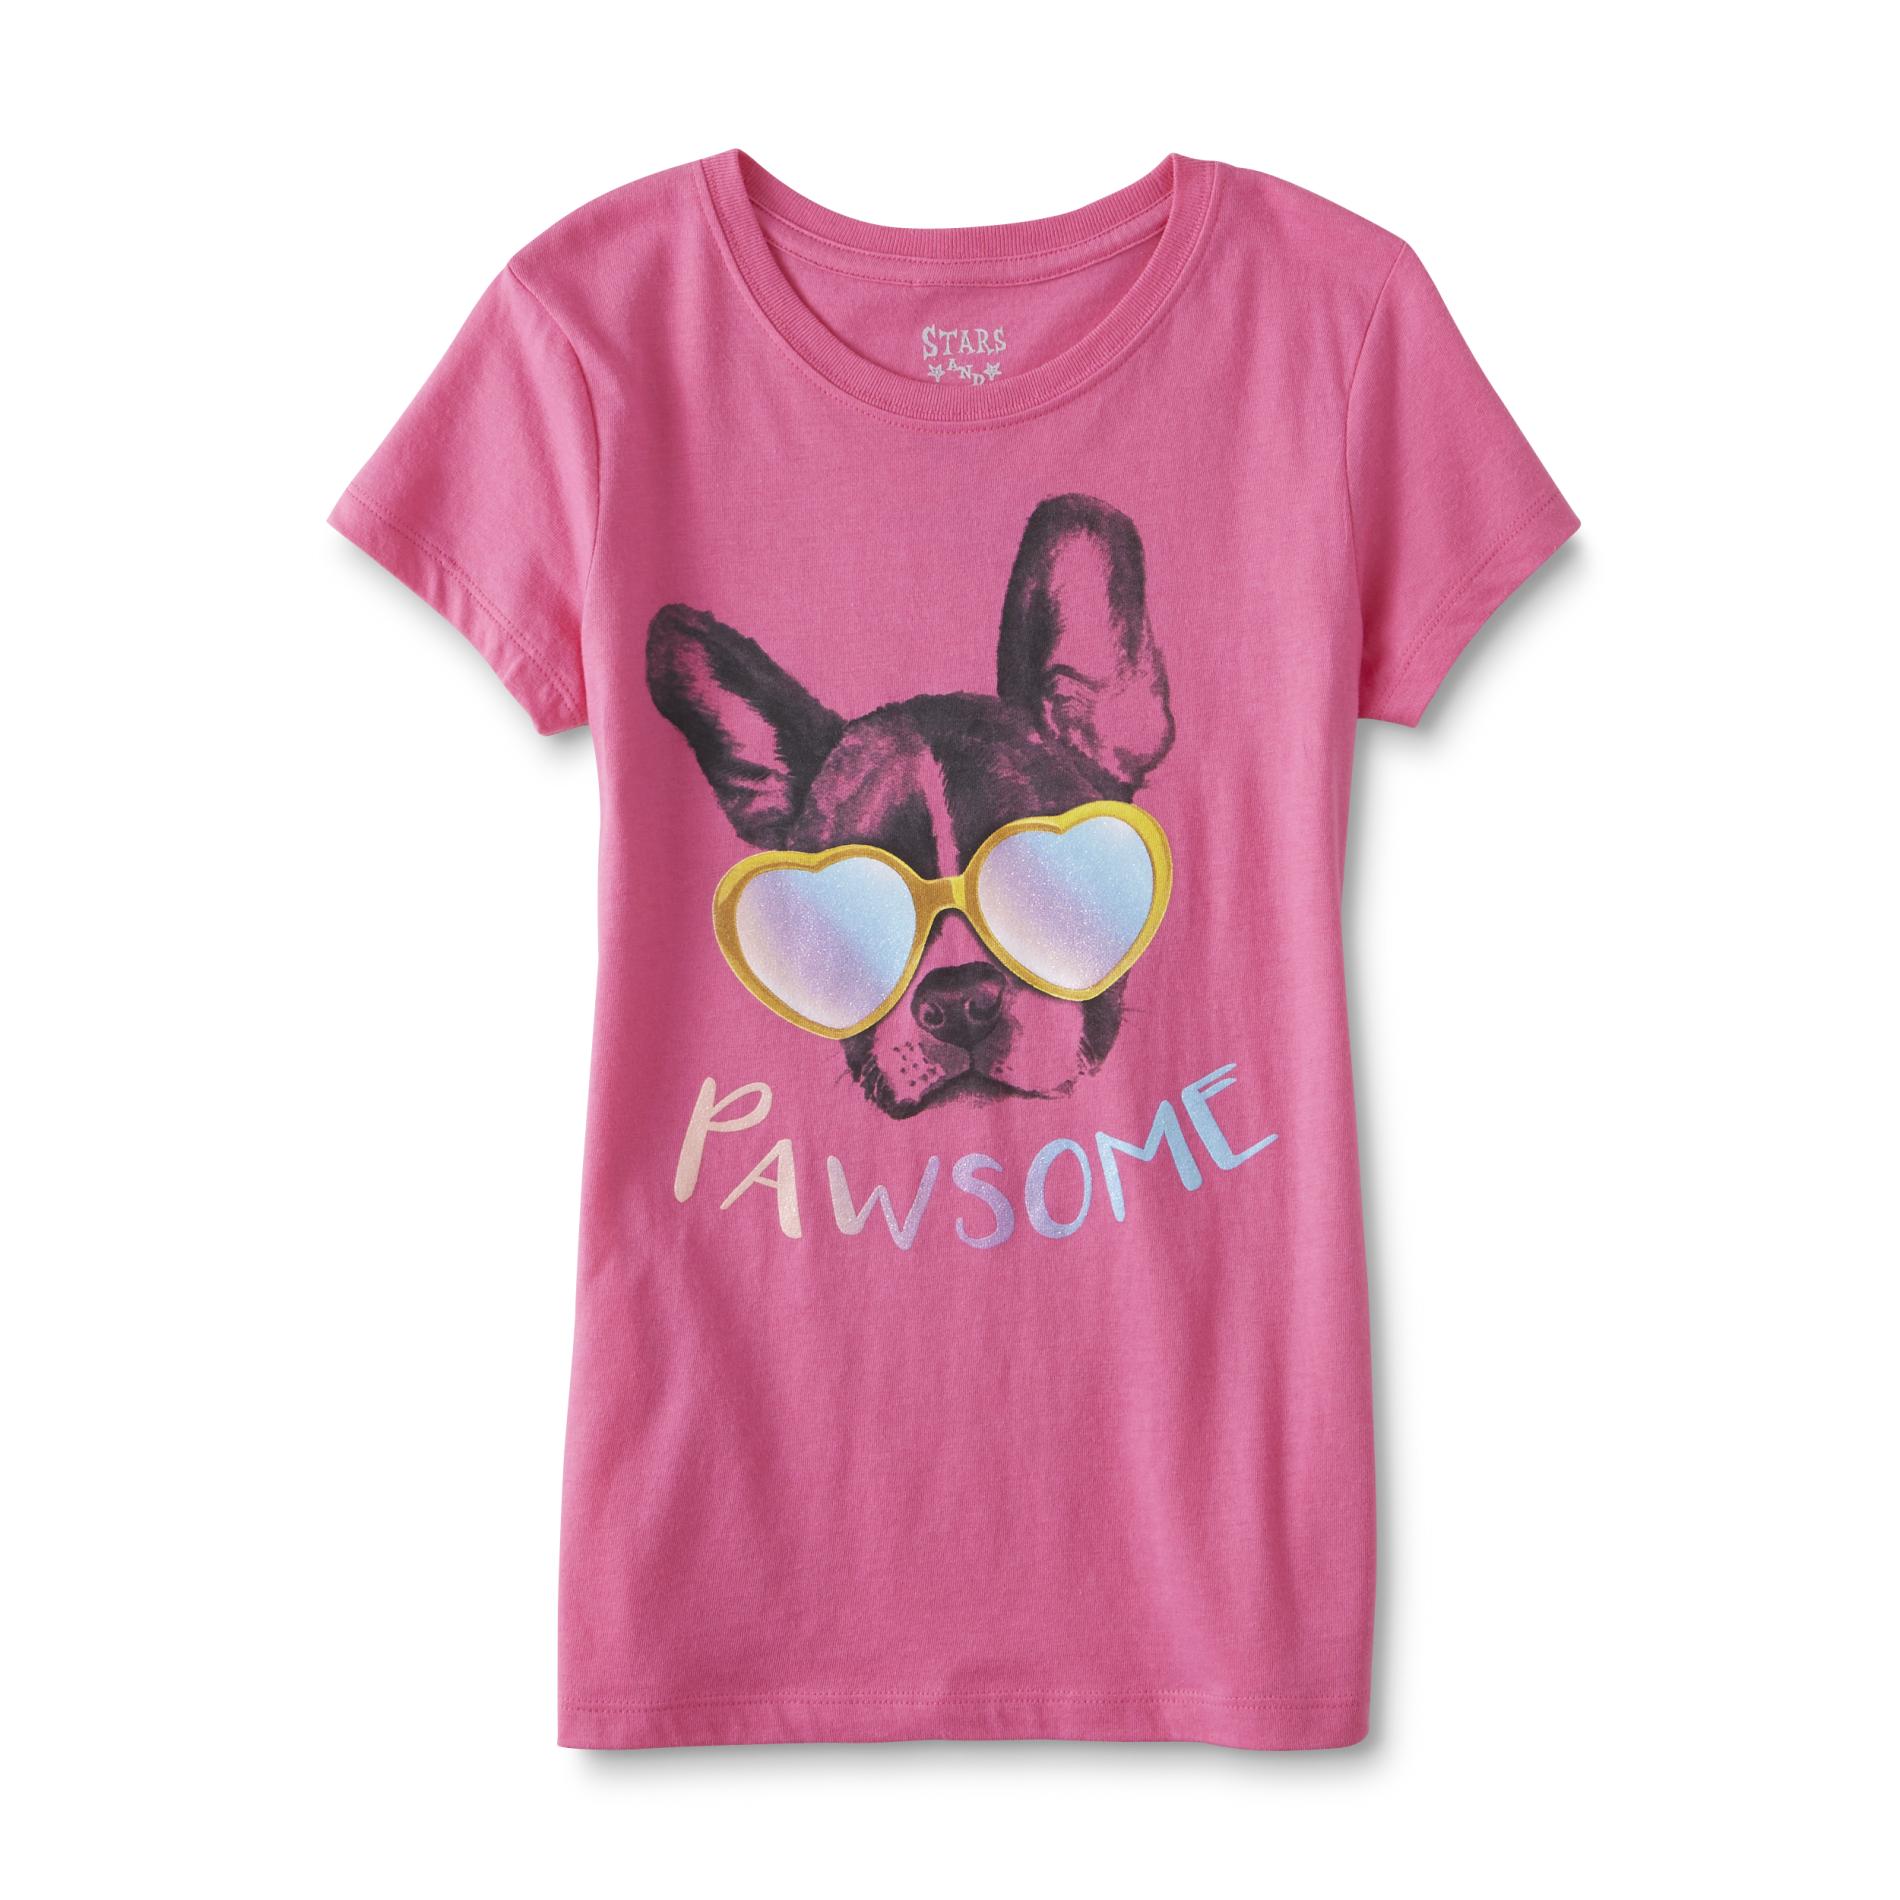 Hybrid Girl's Graphic T-Shirt - Pawesome